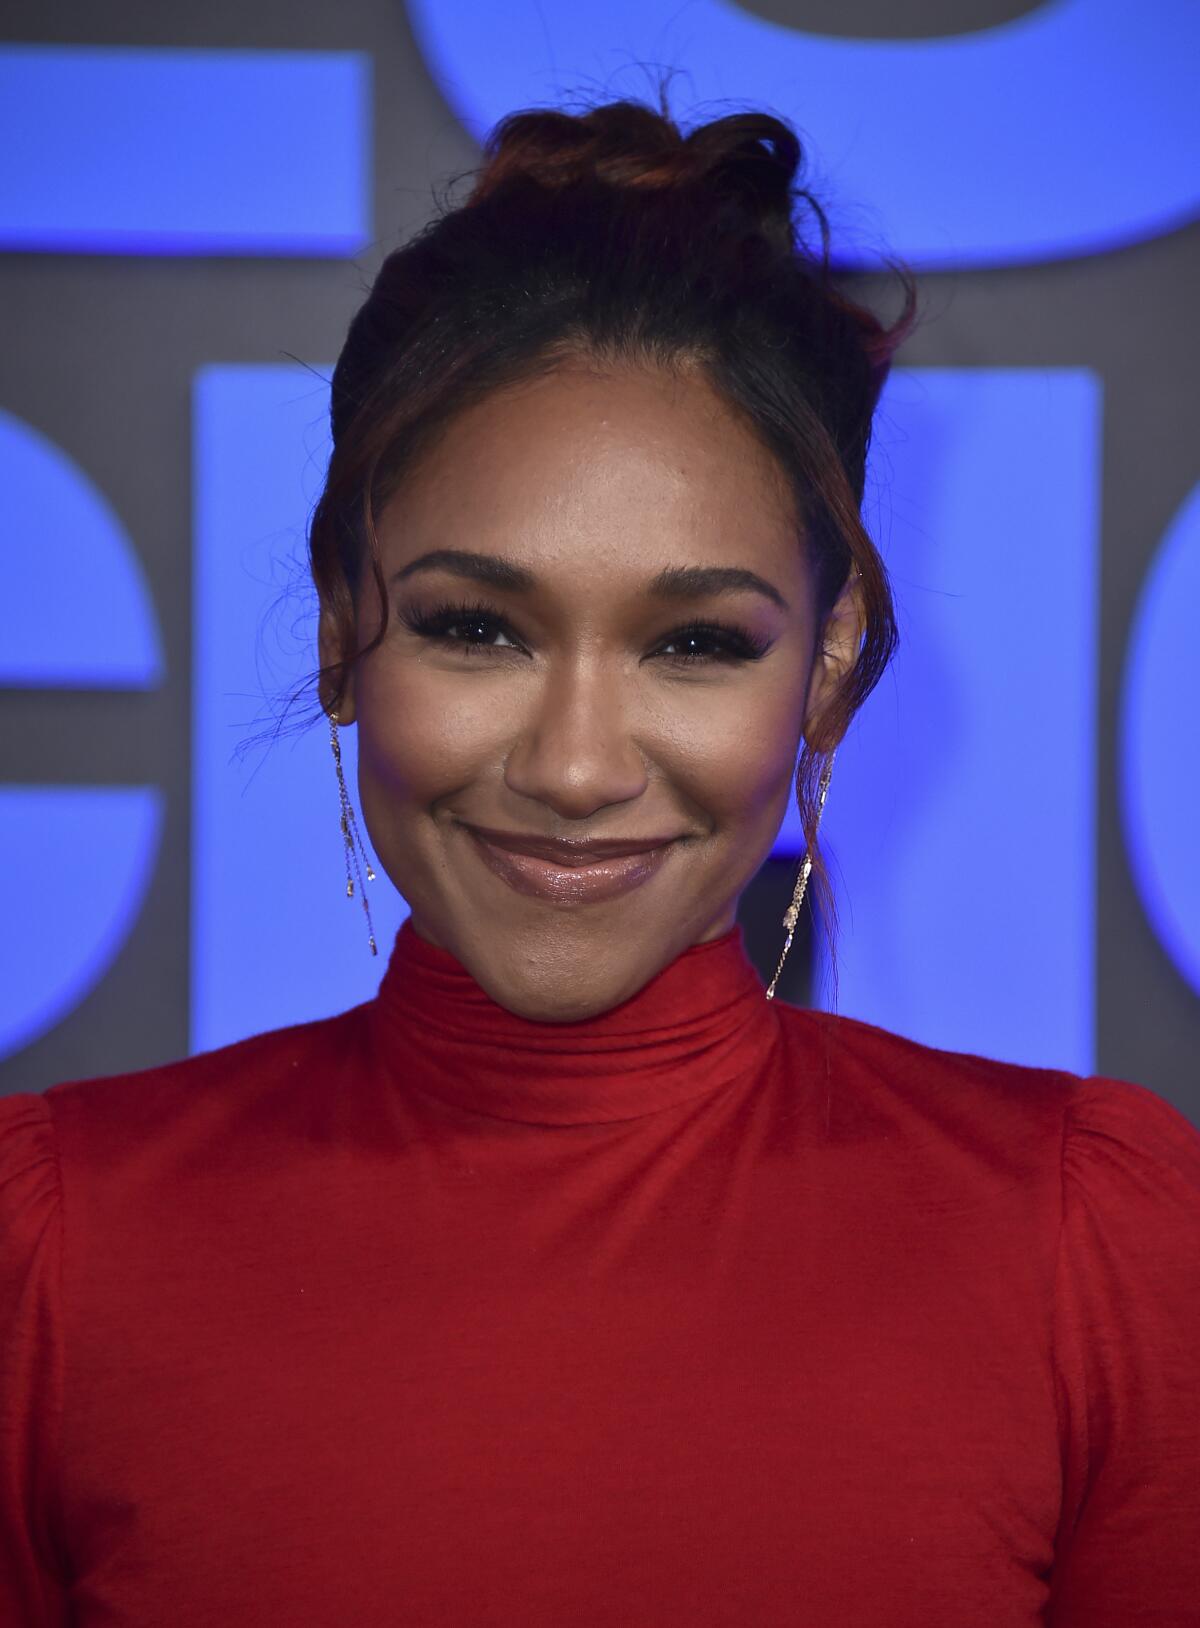 A woman wearing a red turtleneck smiles for cameras at a red carpet event